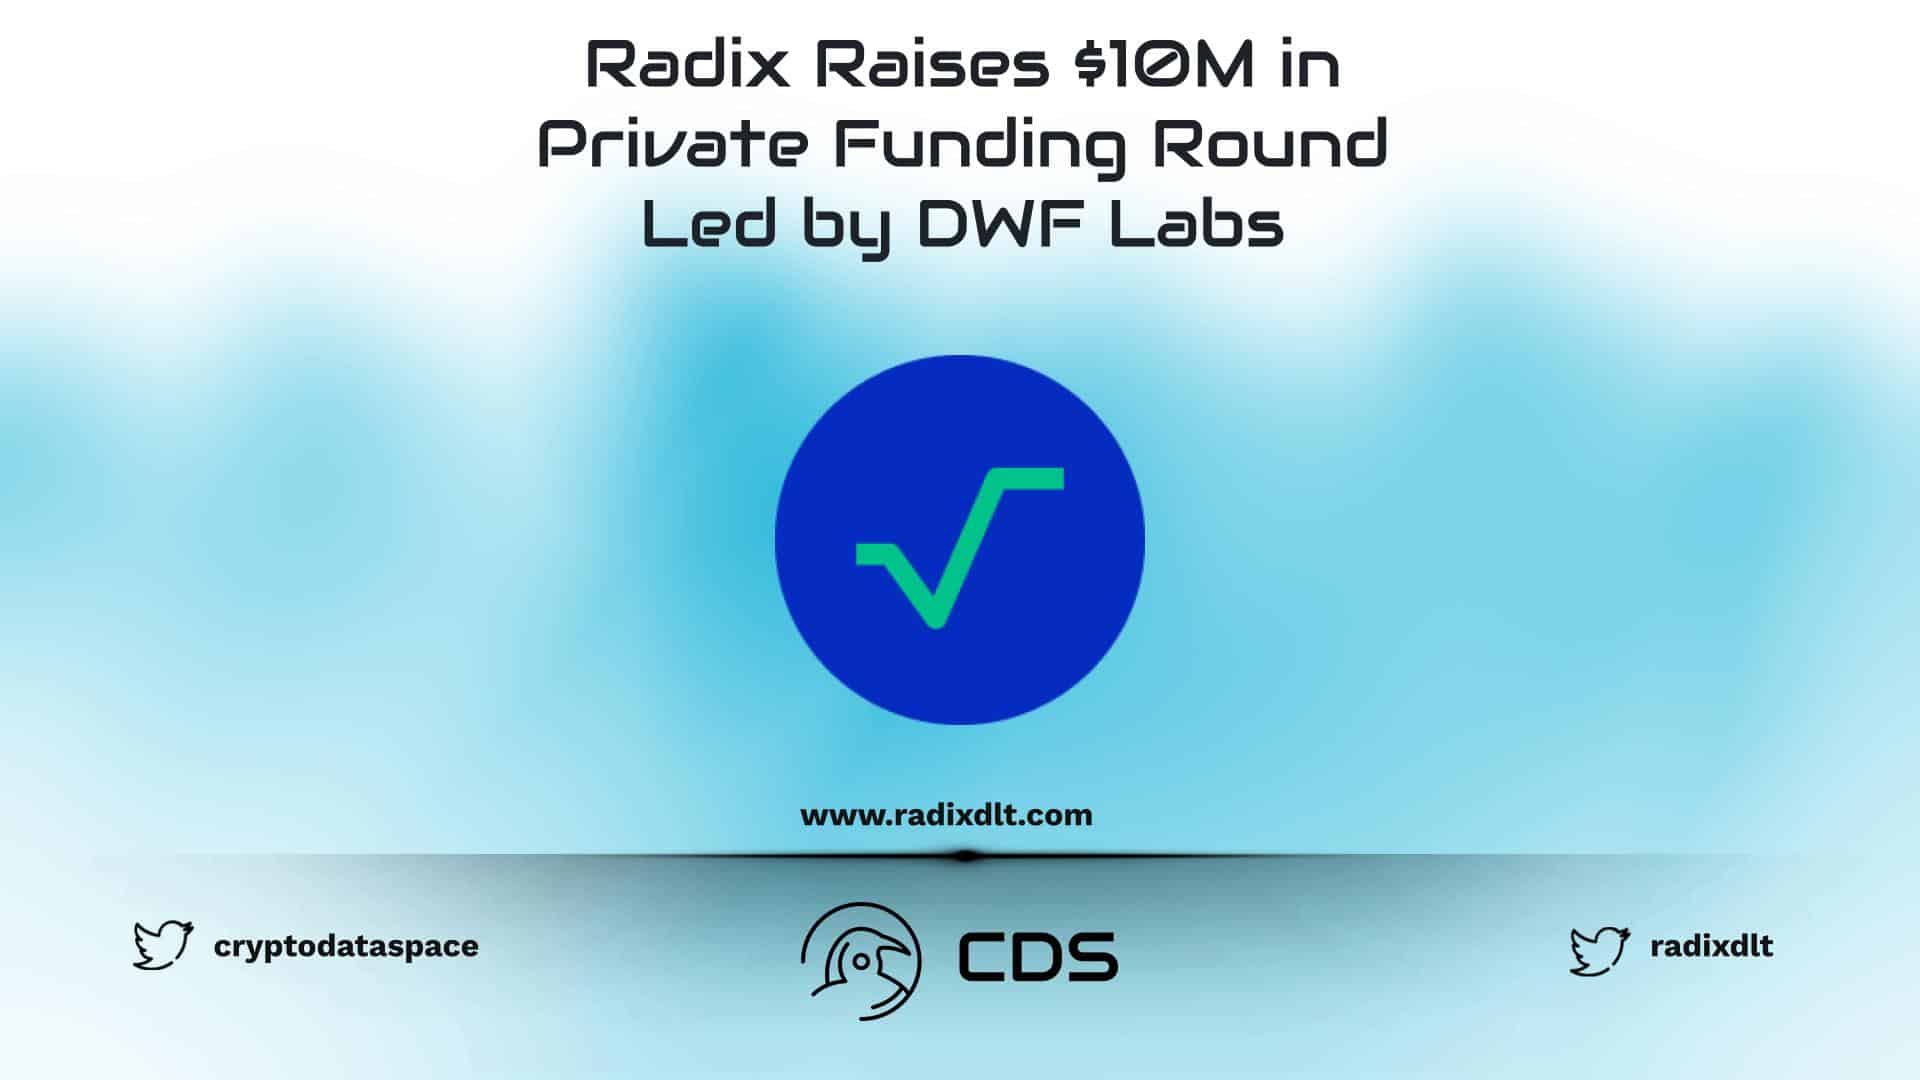 Radix Raises $10M in Private Funding Round Led by DWF Labs